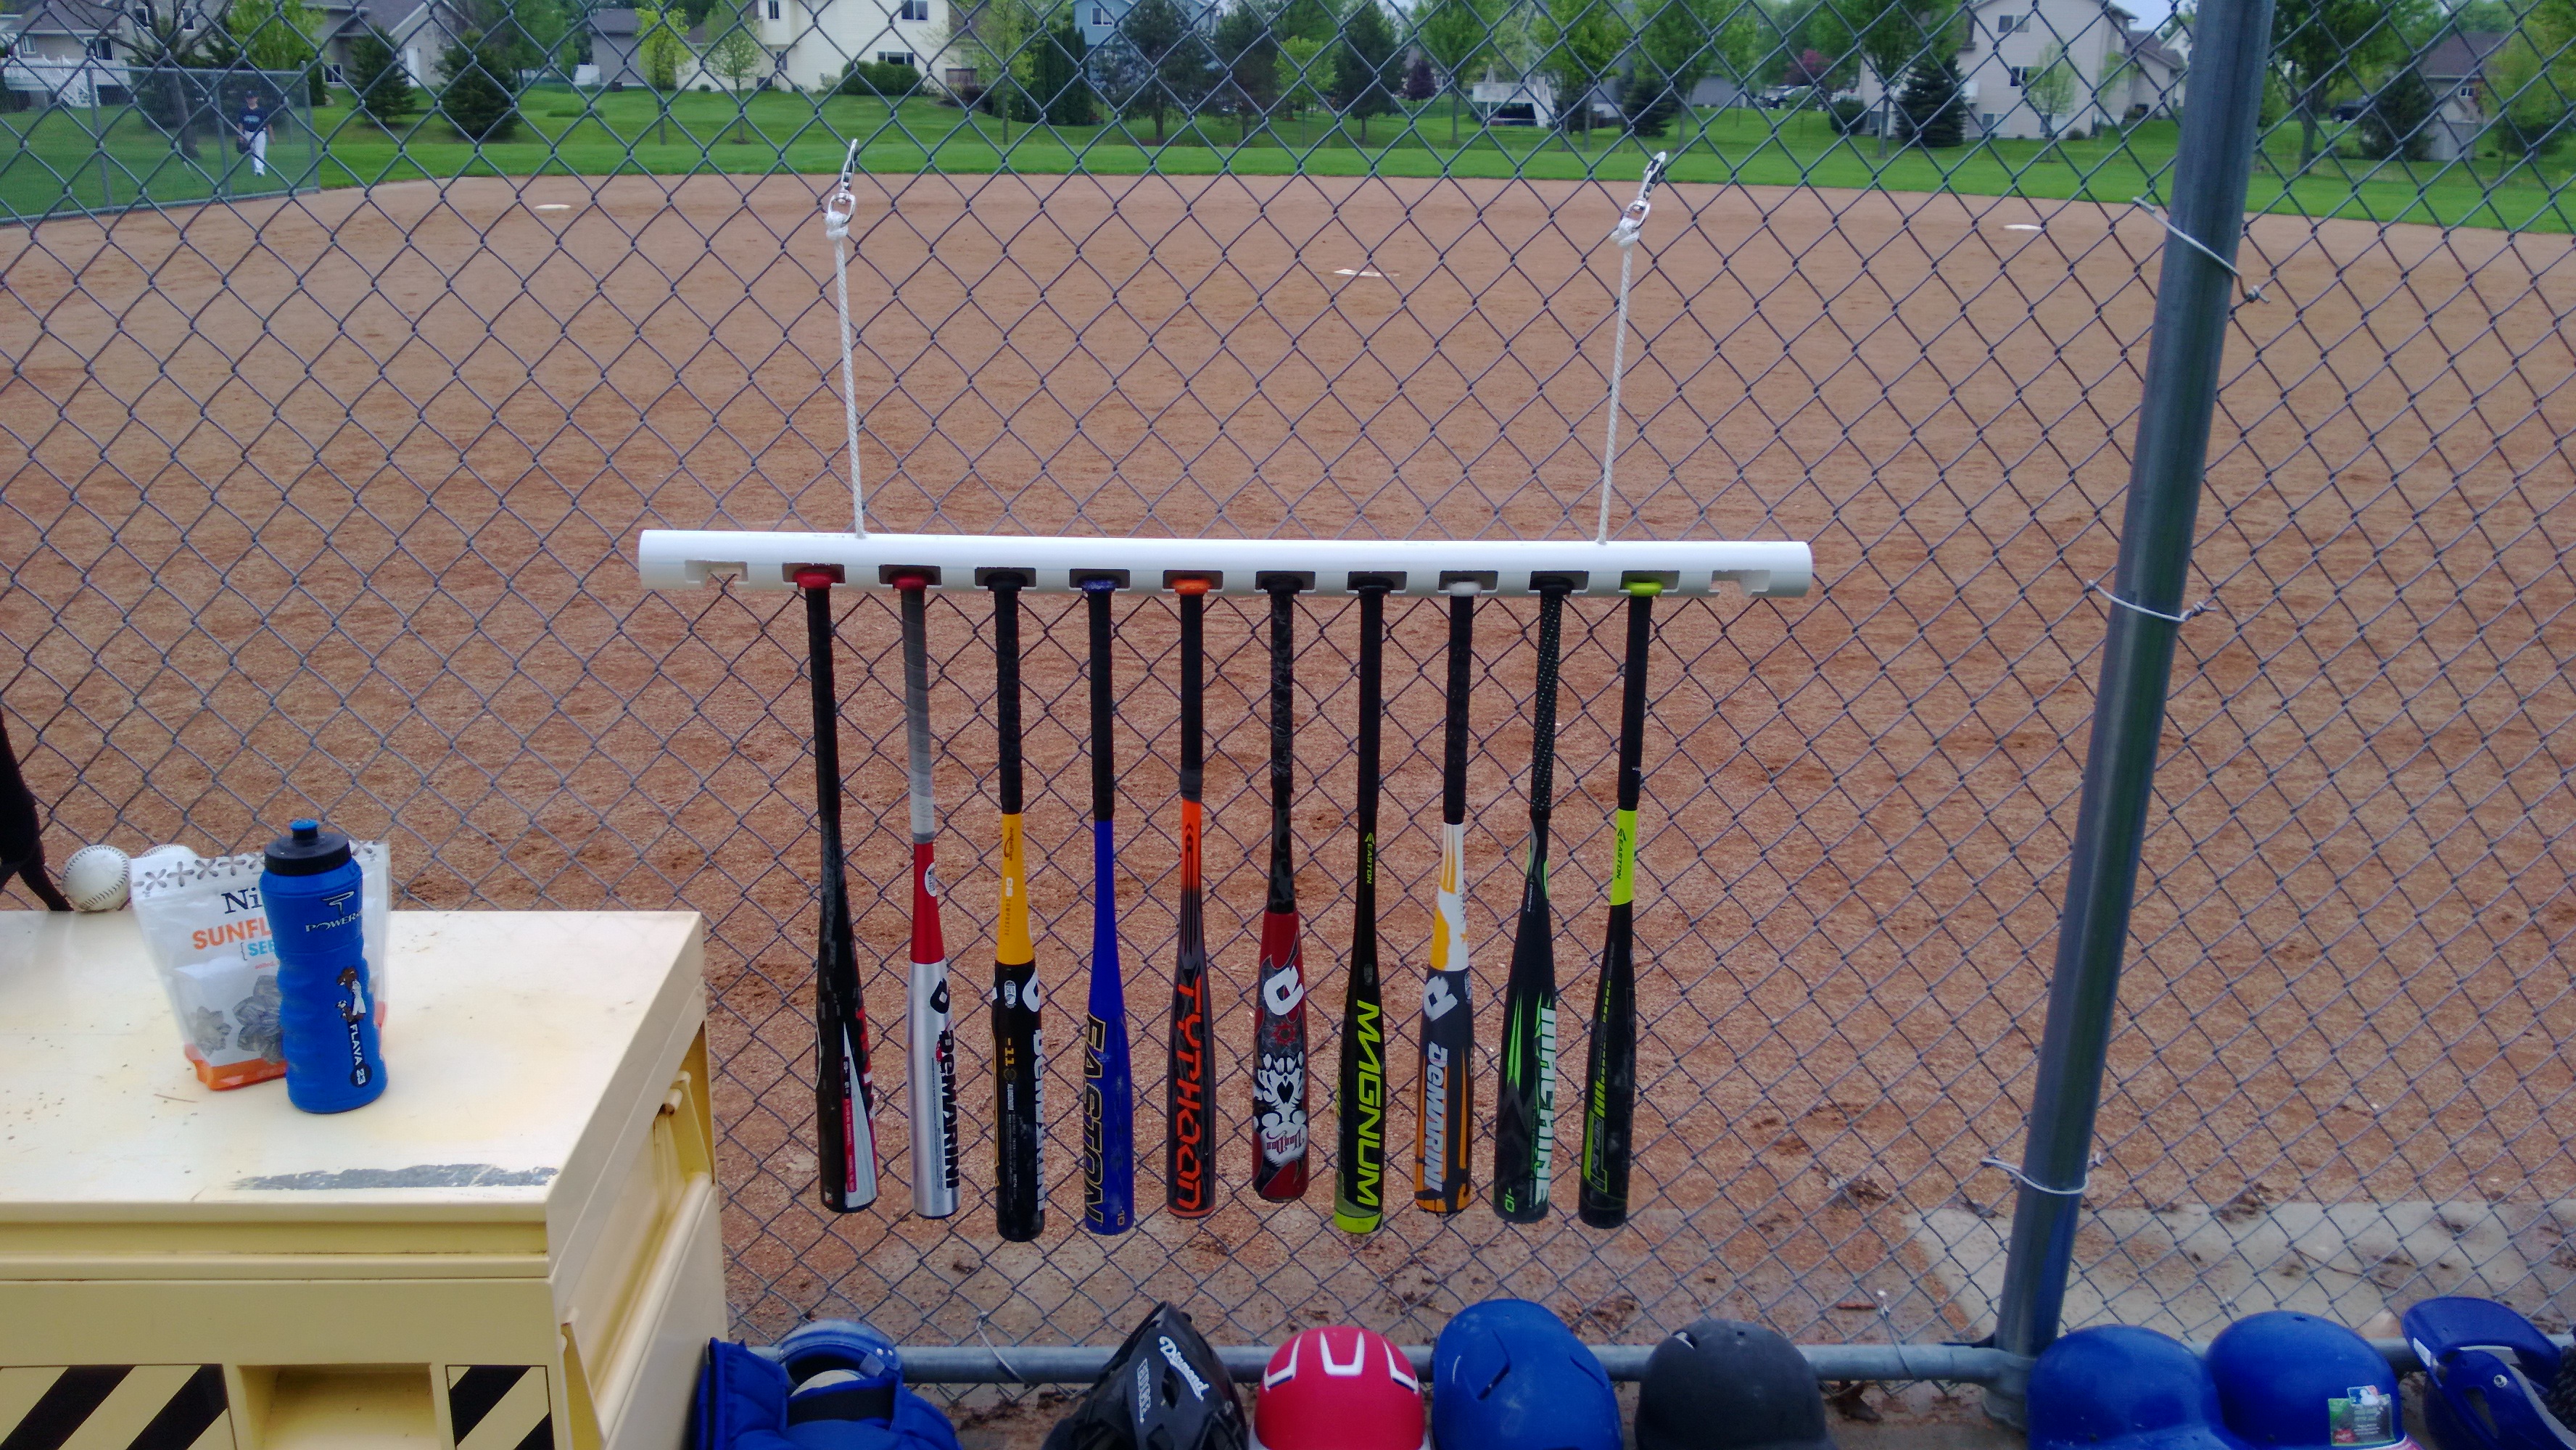 DIY Storage for Sports Equipment with PVC